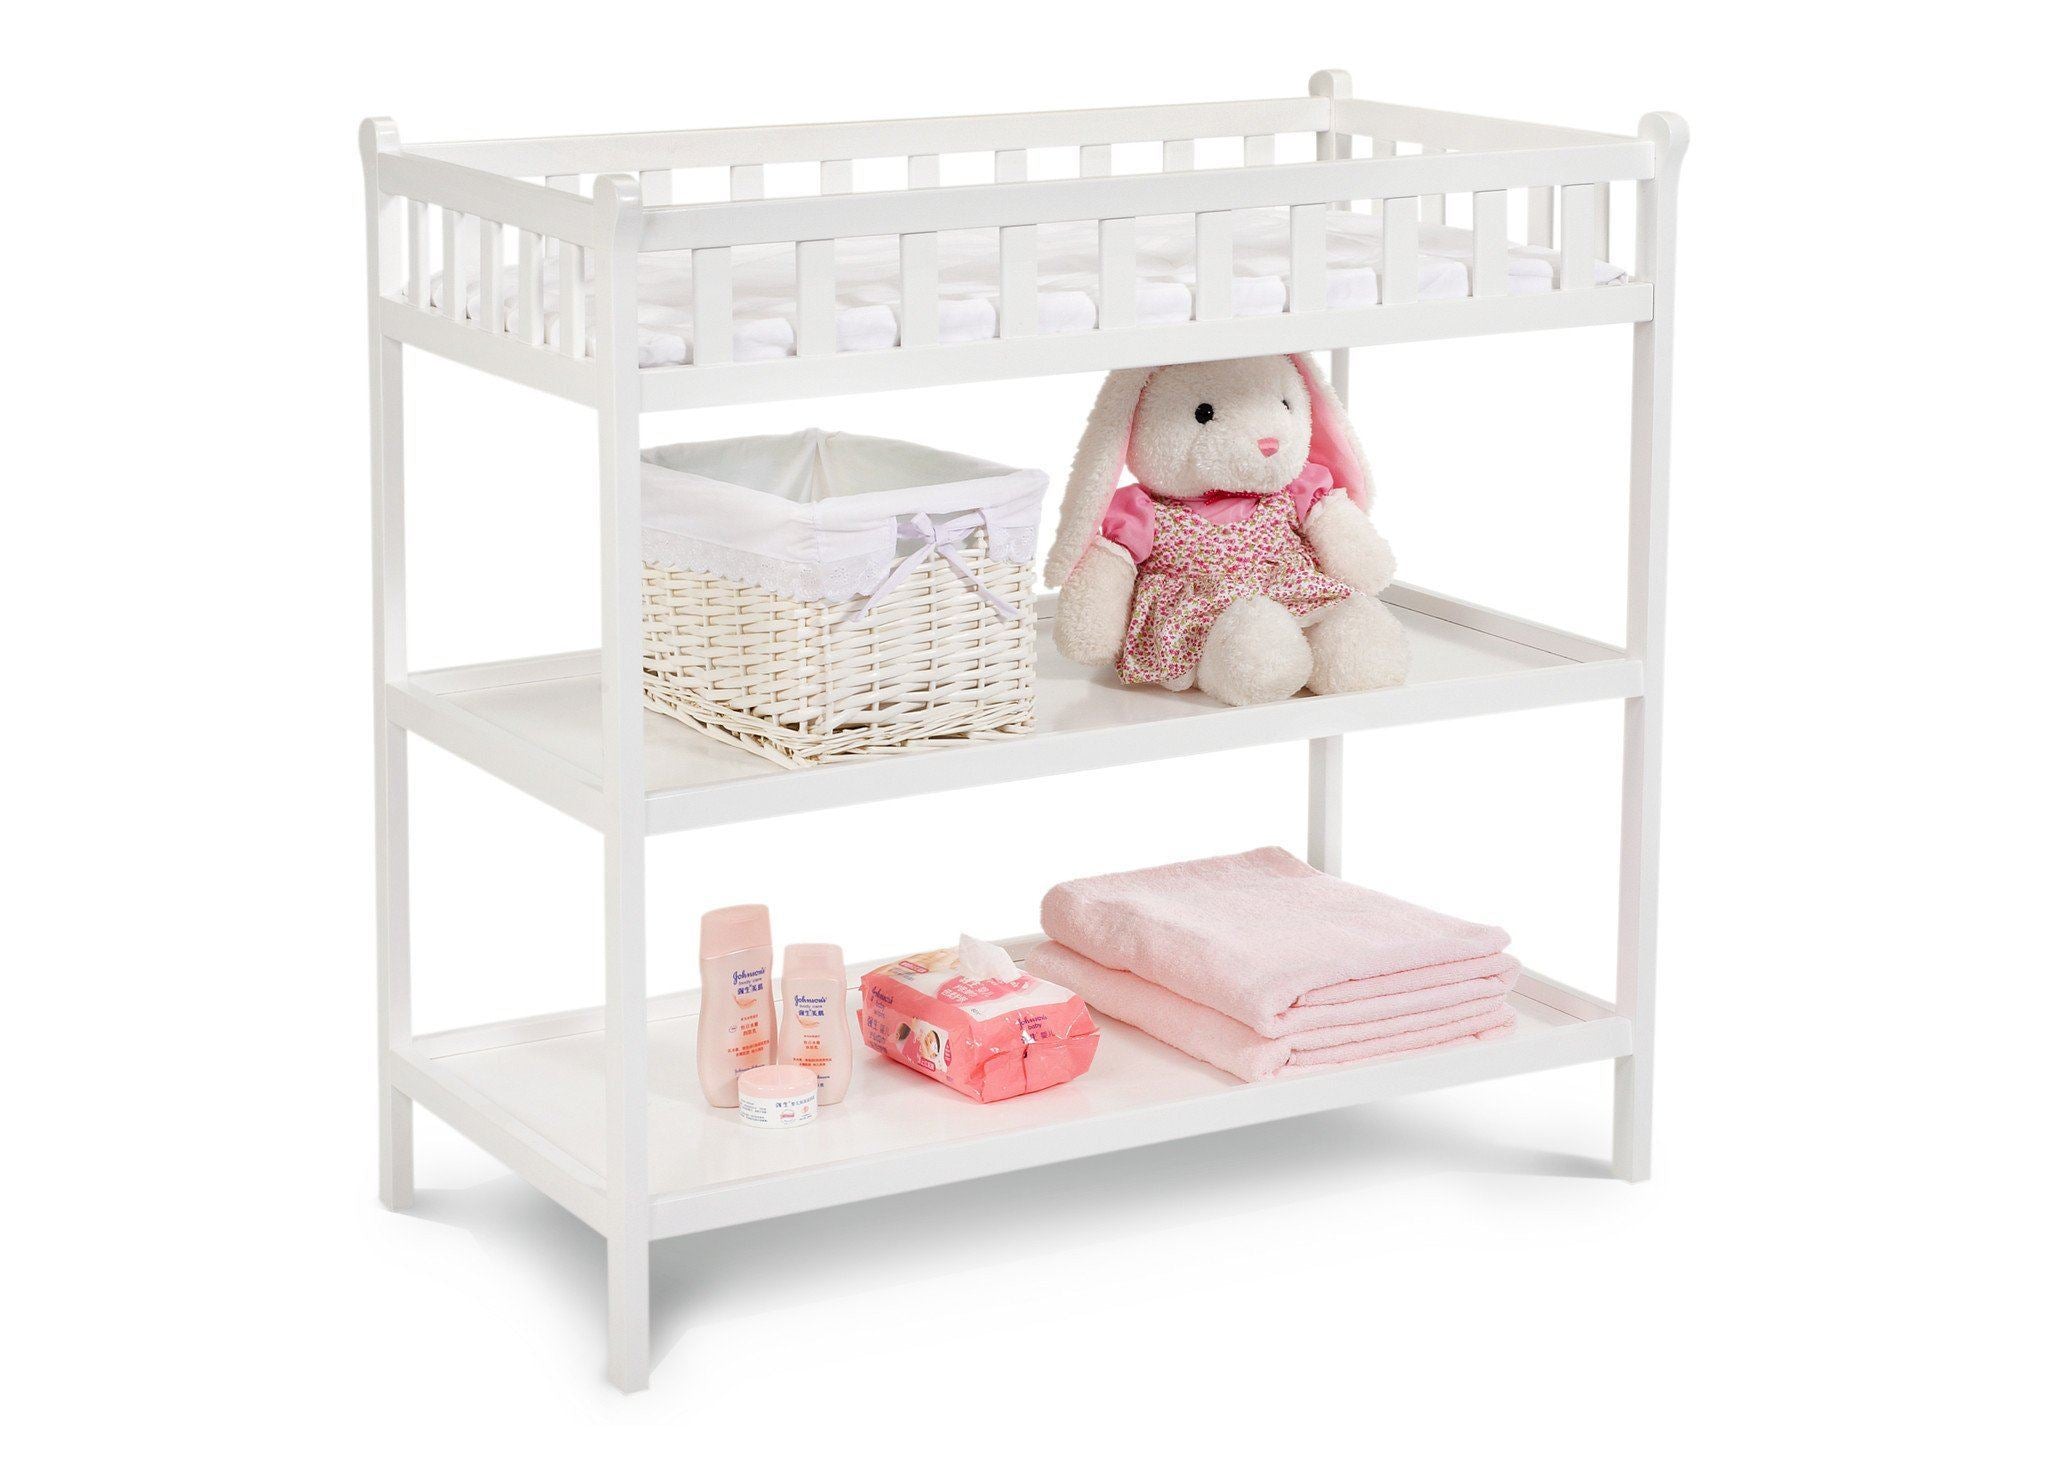 delta adley changing table